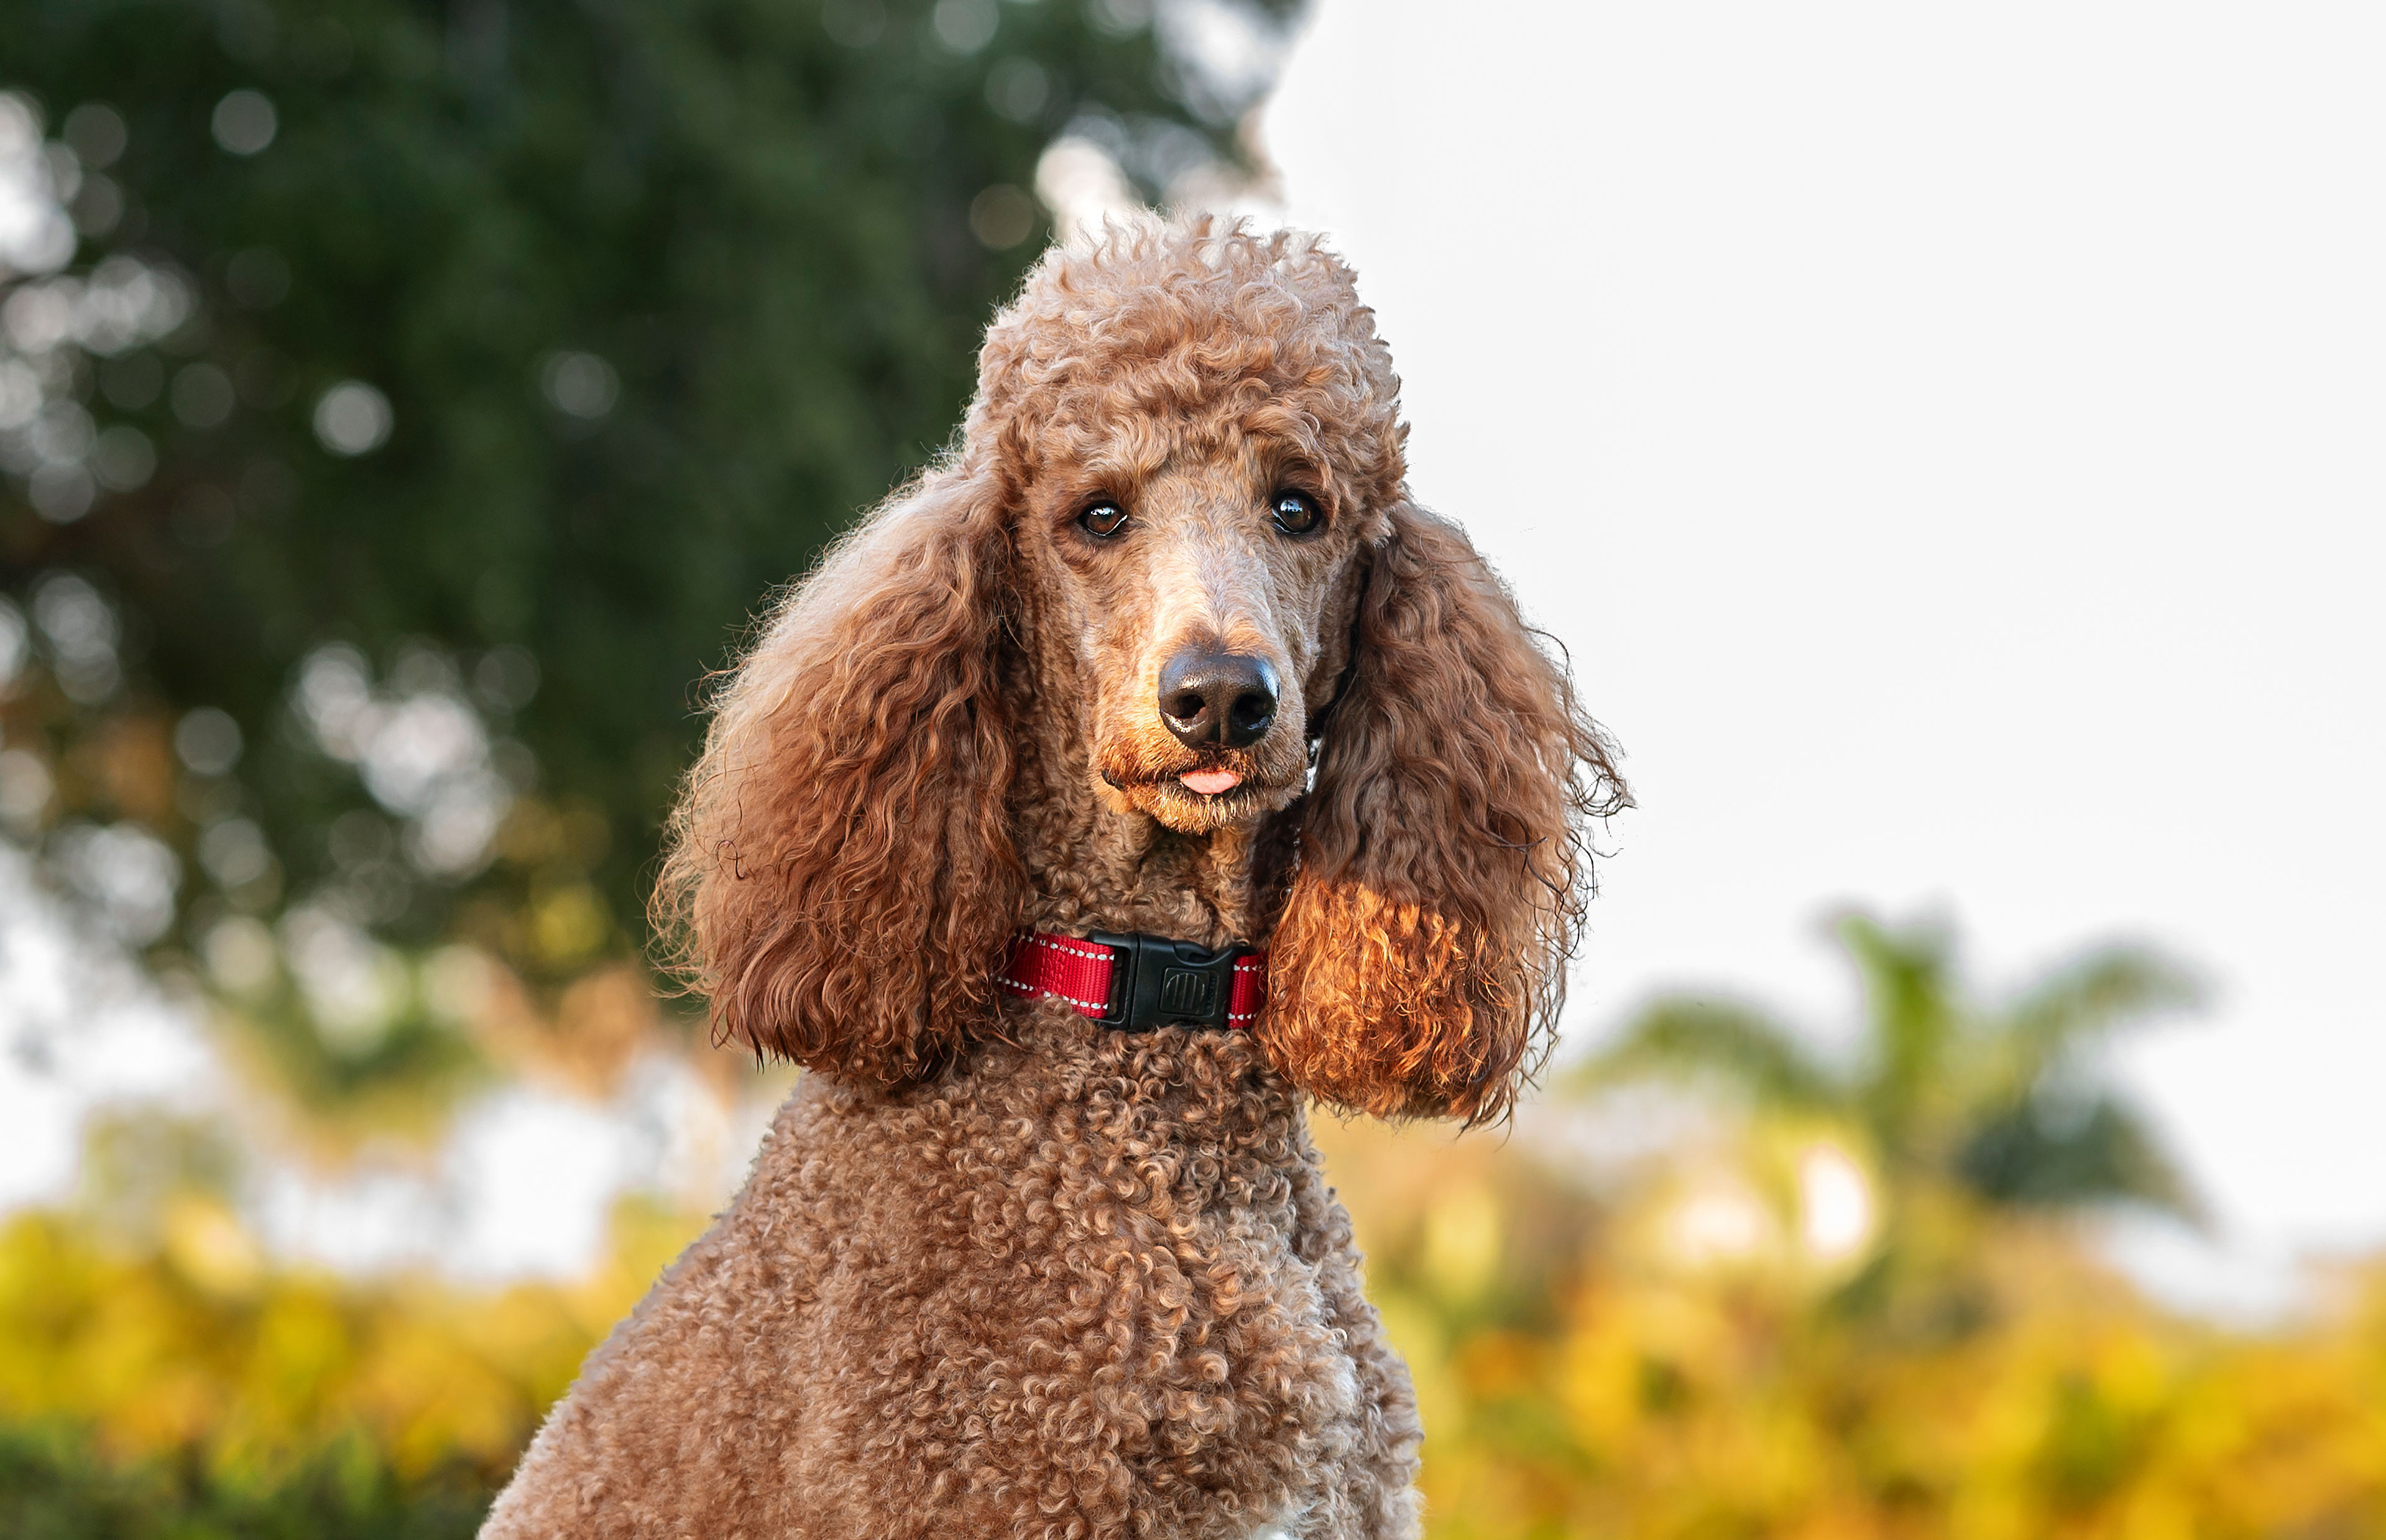 One brown adult Royal Standard Poodle at the park